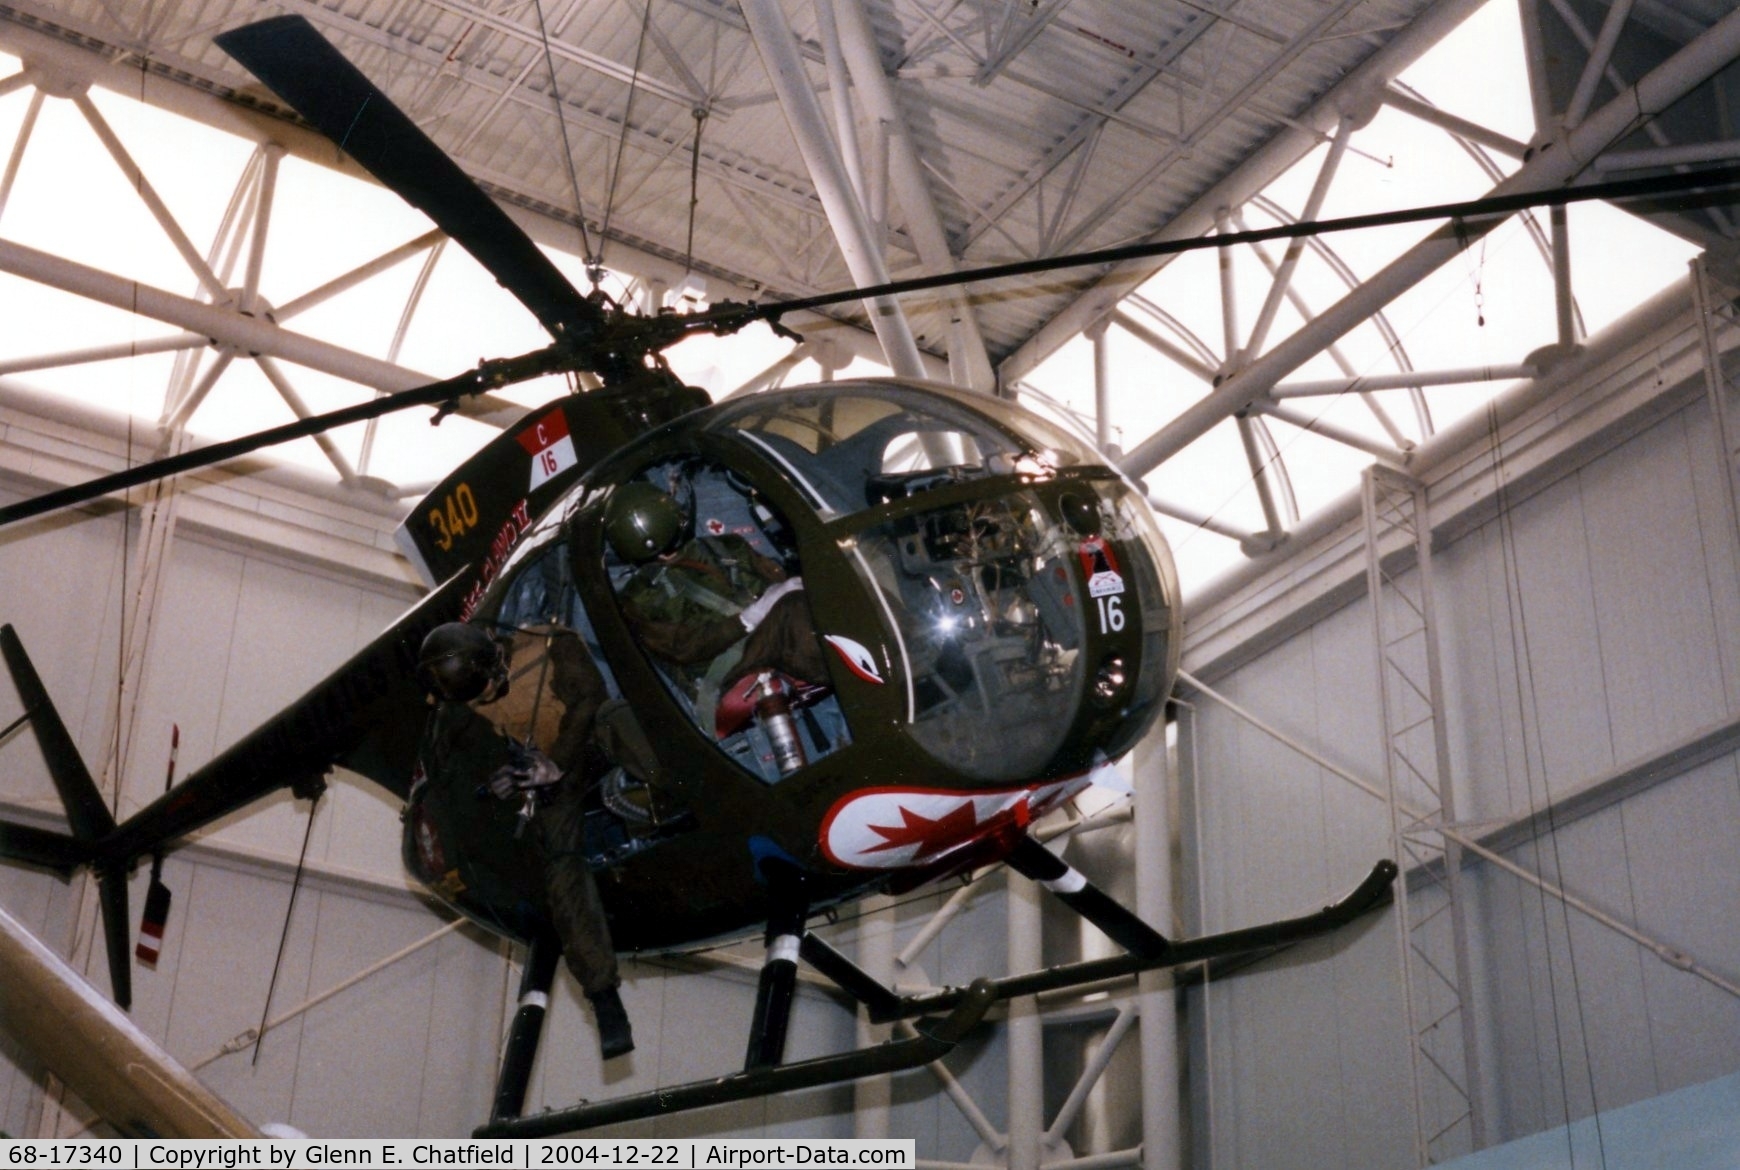 68-17340, 1968 Hughes OH-6A Cayuse C/N 1300, OH-6A at the Army Aviation Museum